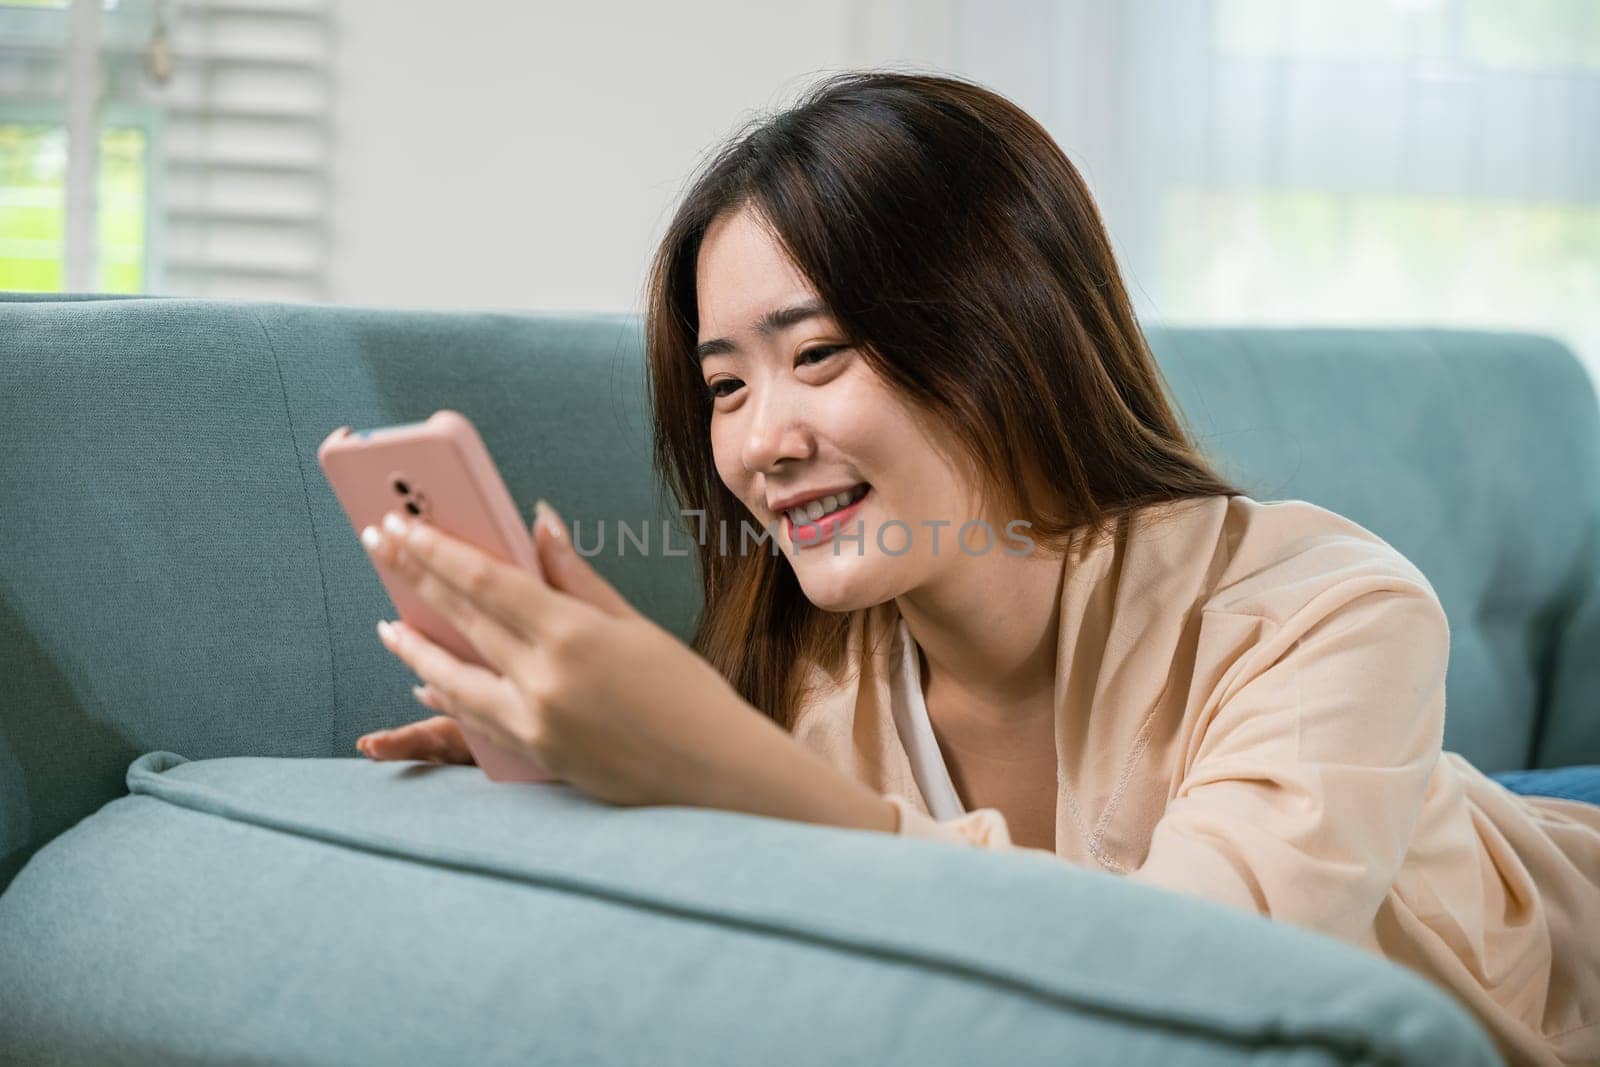 Smiling attractive woman relaxed reading text message on smartphone by Sorapop